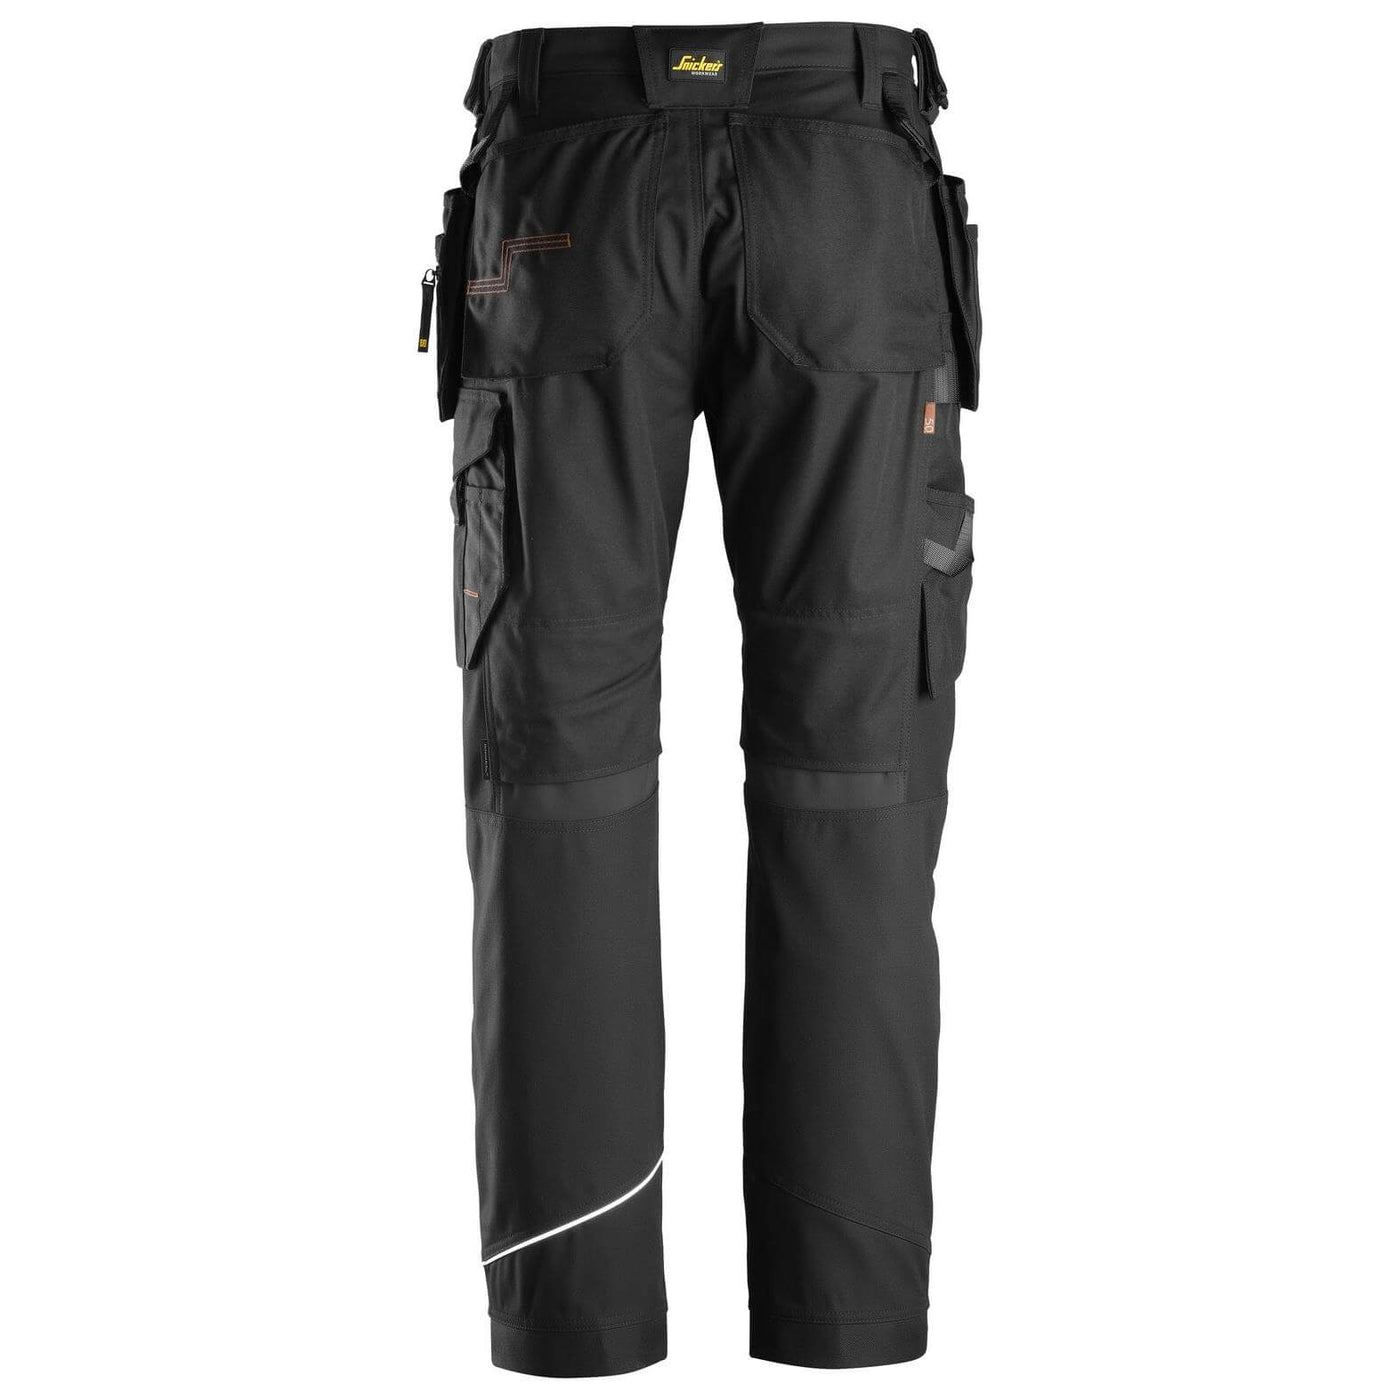 Snickers 6214 RuffWork Canvas+ Hard Wearing Work Trousers with Holster Pockets Black Black back #colour_black-black